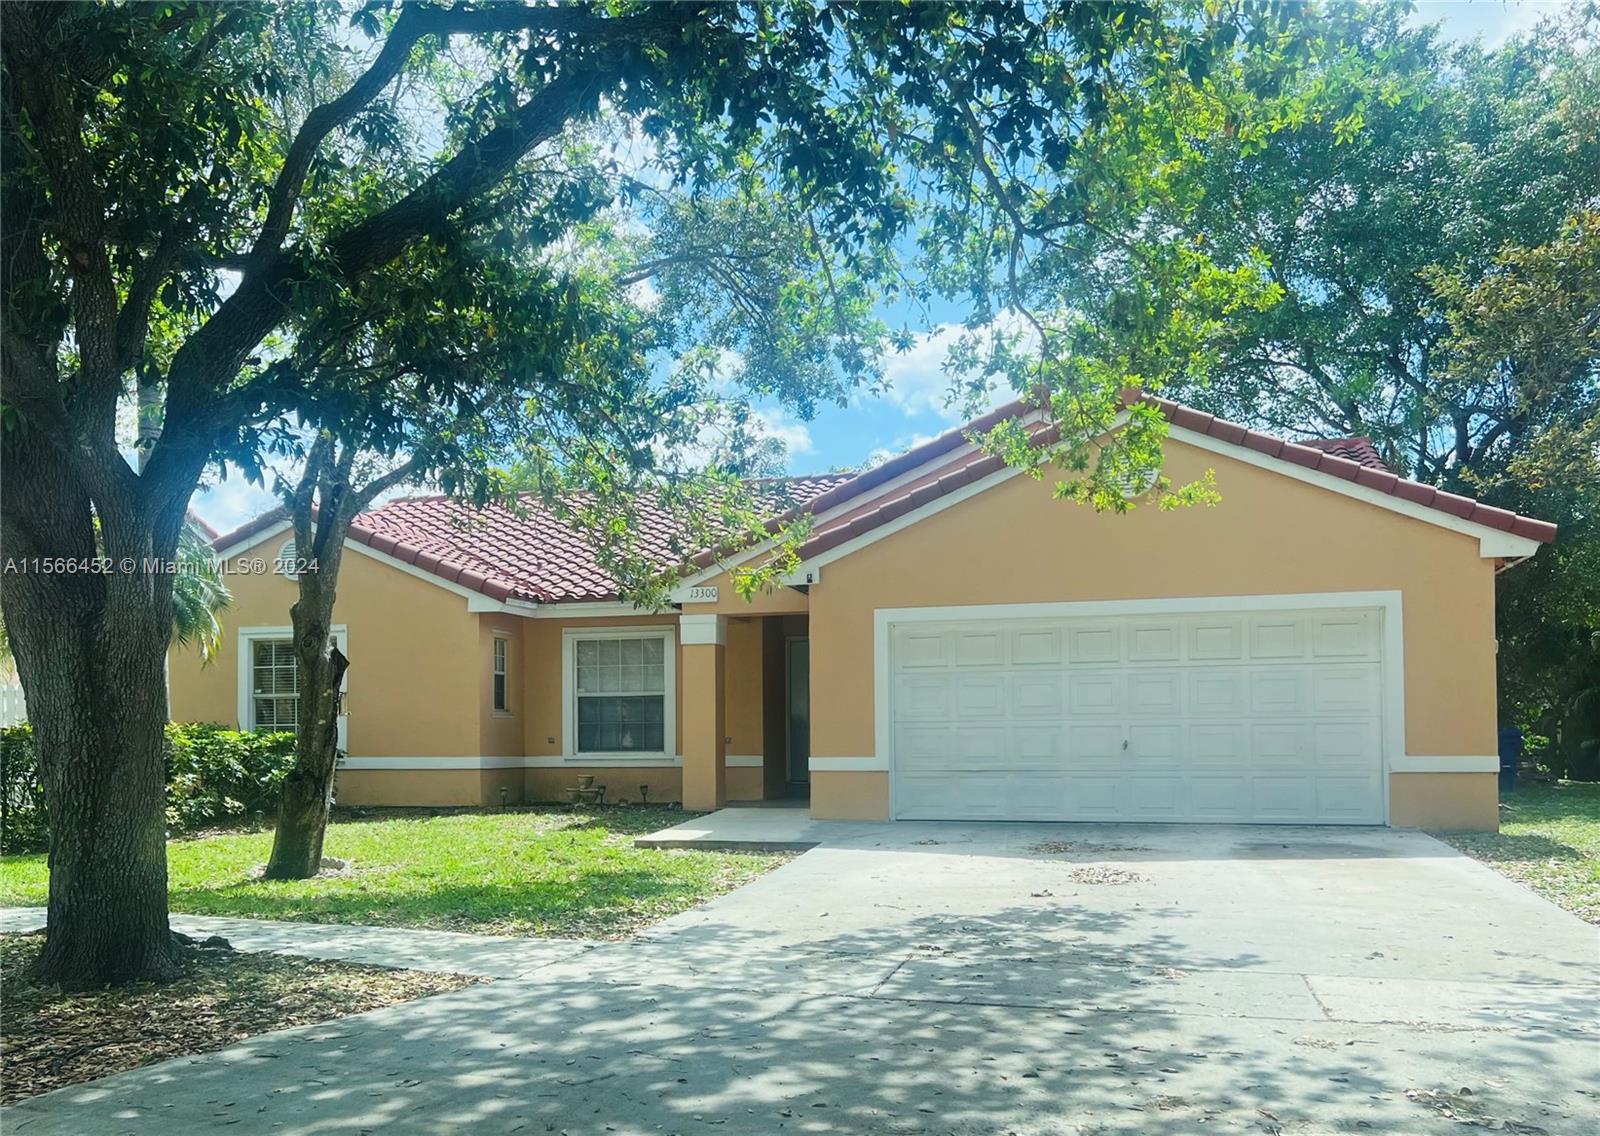 13300 SW 20th St, Miramar, Florida 33027, 3 Bedrooms Bedrooms, ,2 BathroomsBathrooms,Residential,For Sale,13300 SW 20th St,A11566452